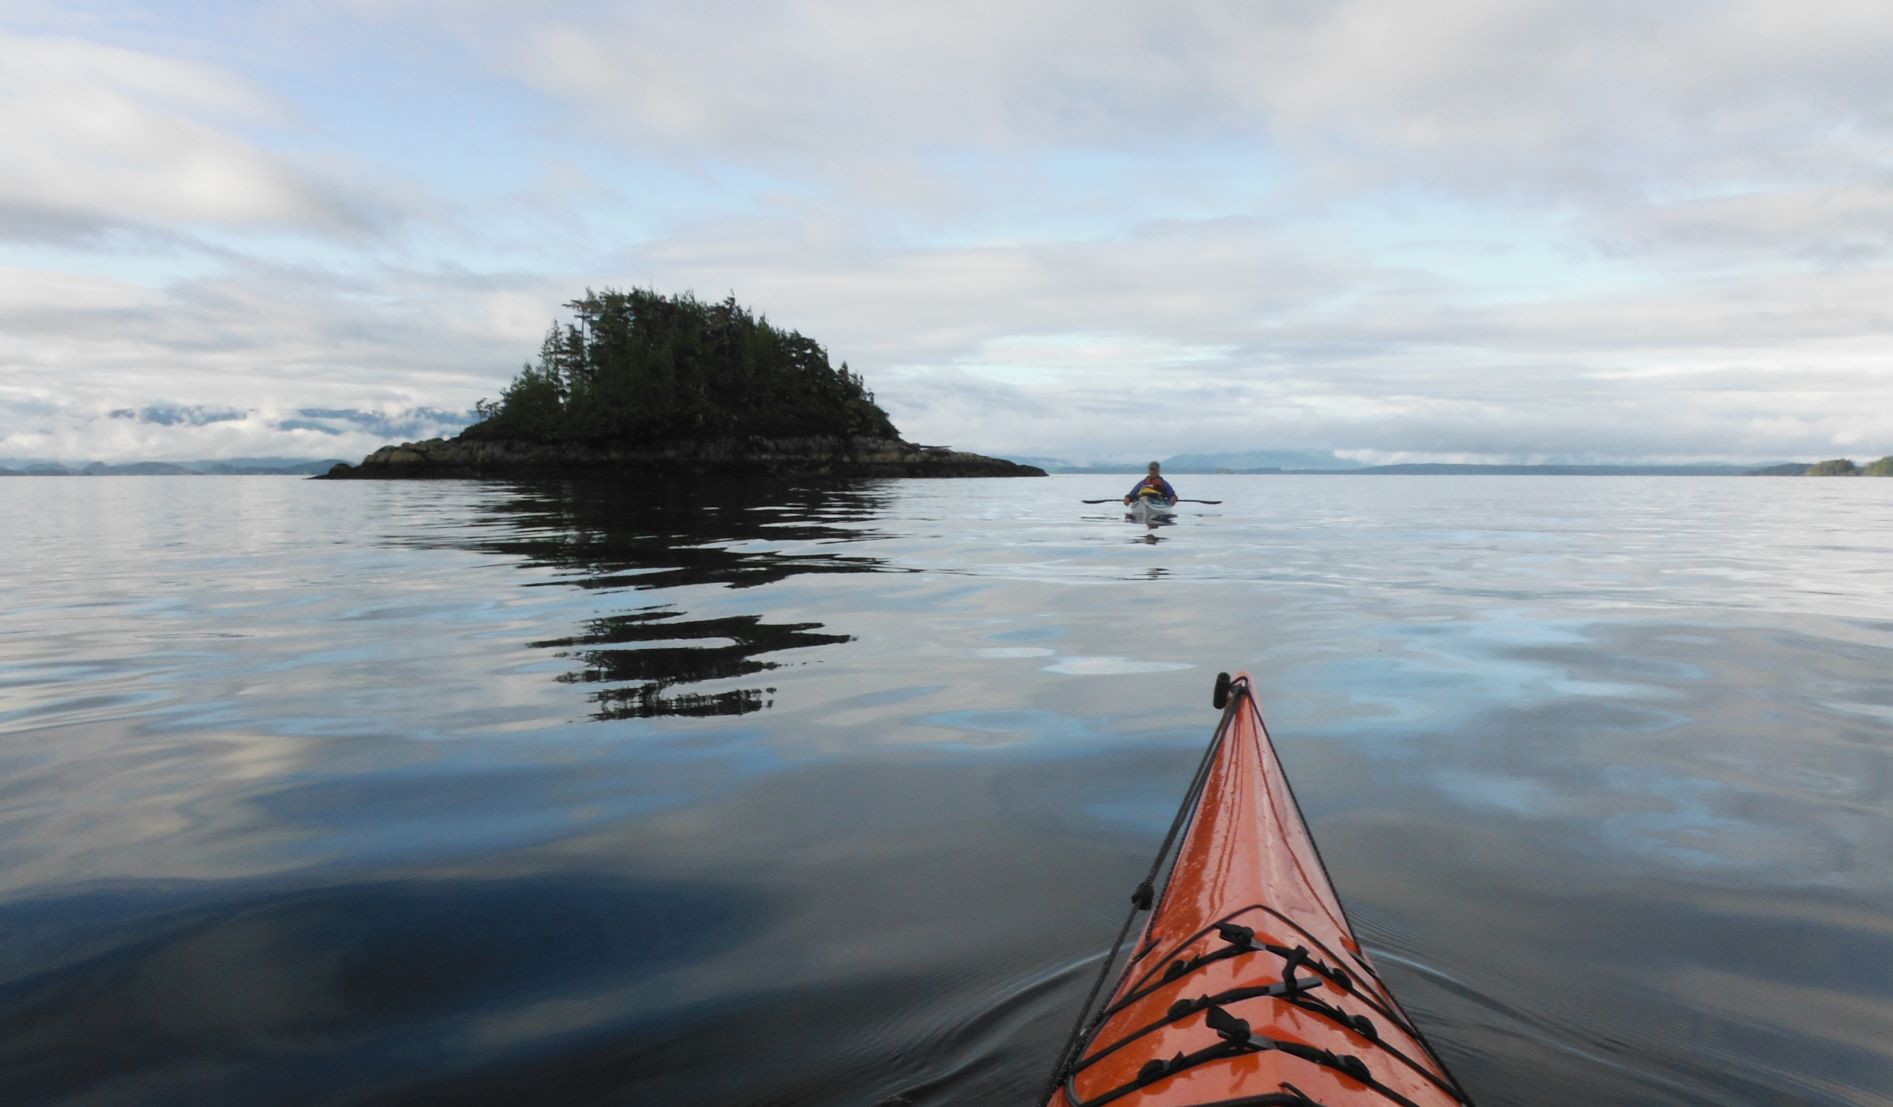 Photo of kayak in waters by Olden Island